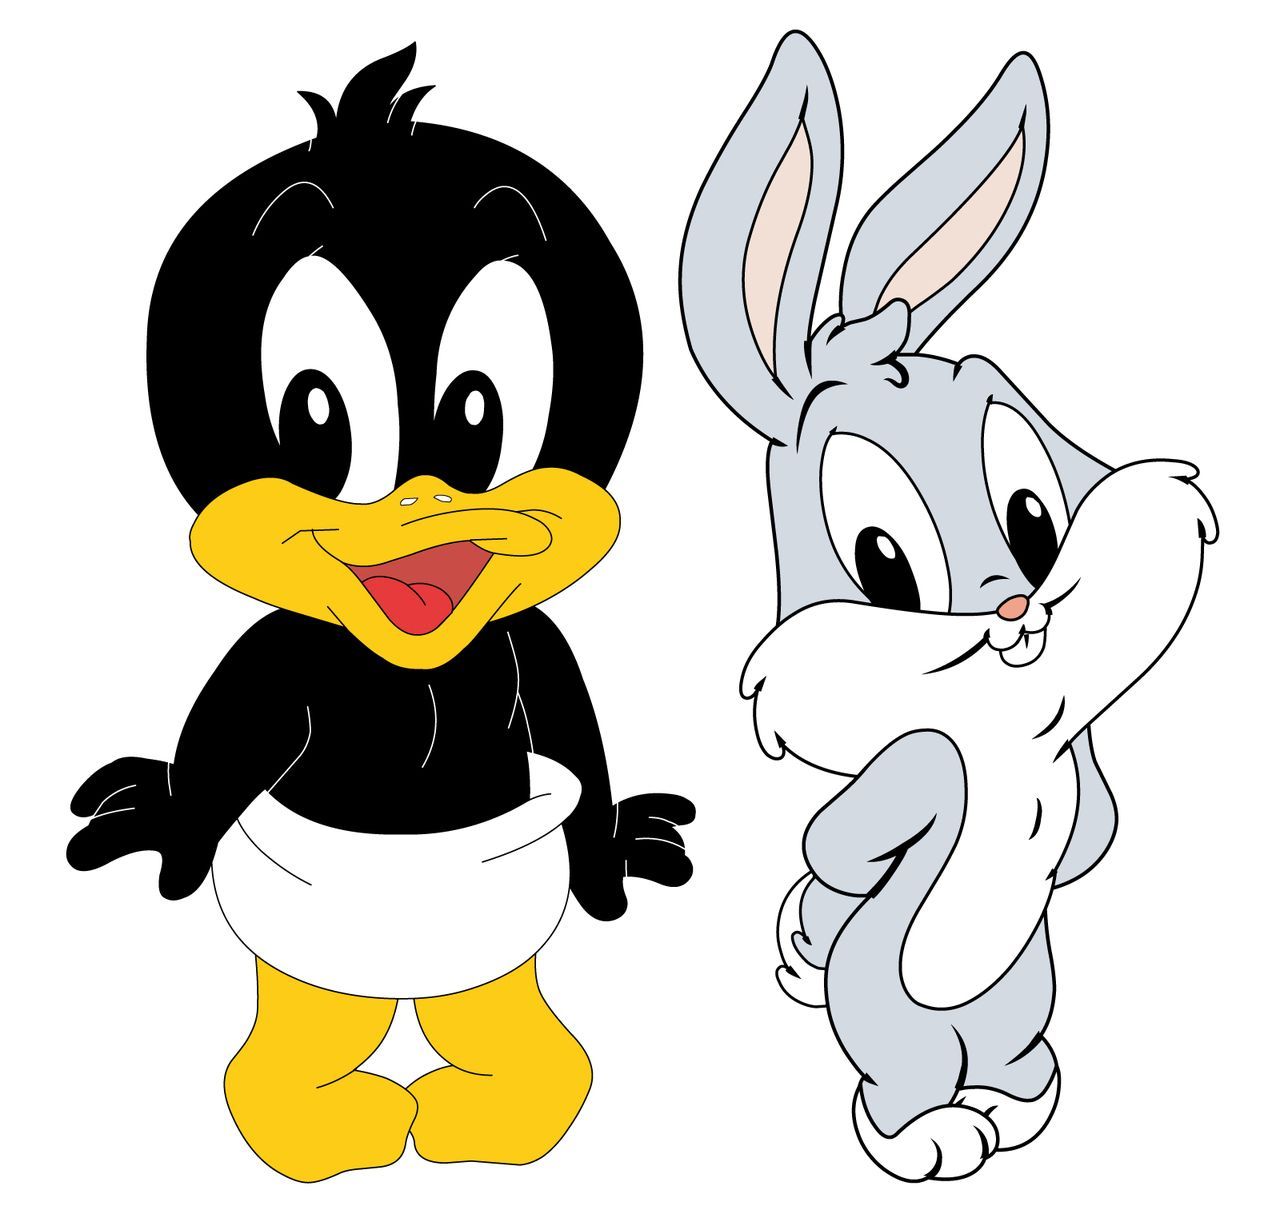 Baby Daffy Duck and Bugs Bunny Wall Stickers Movable. Baby looney tunes, Looney tunes characters, Daffy duck